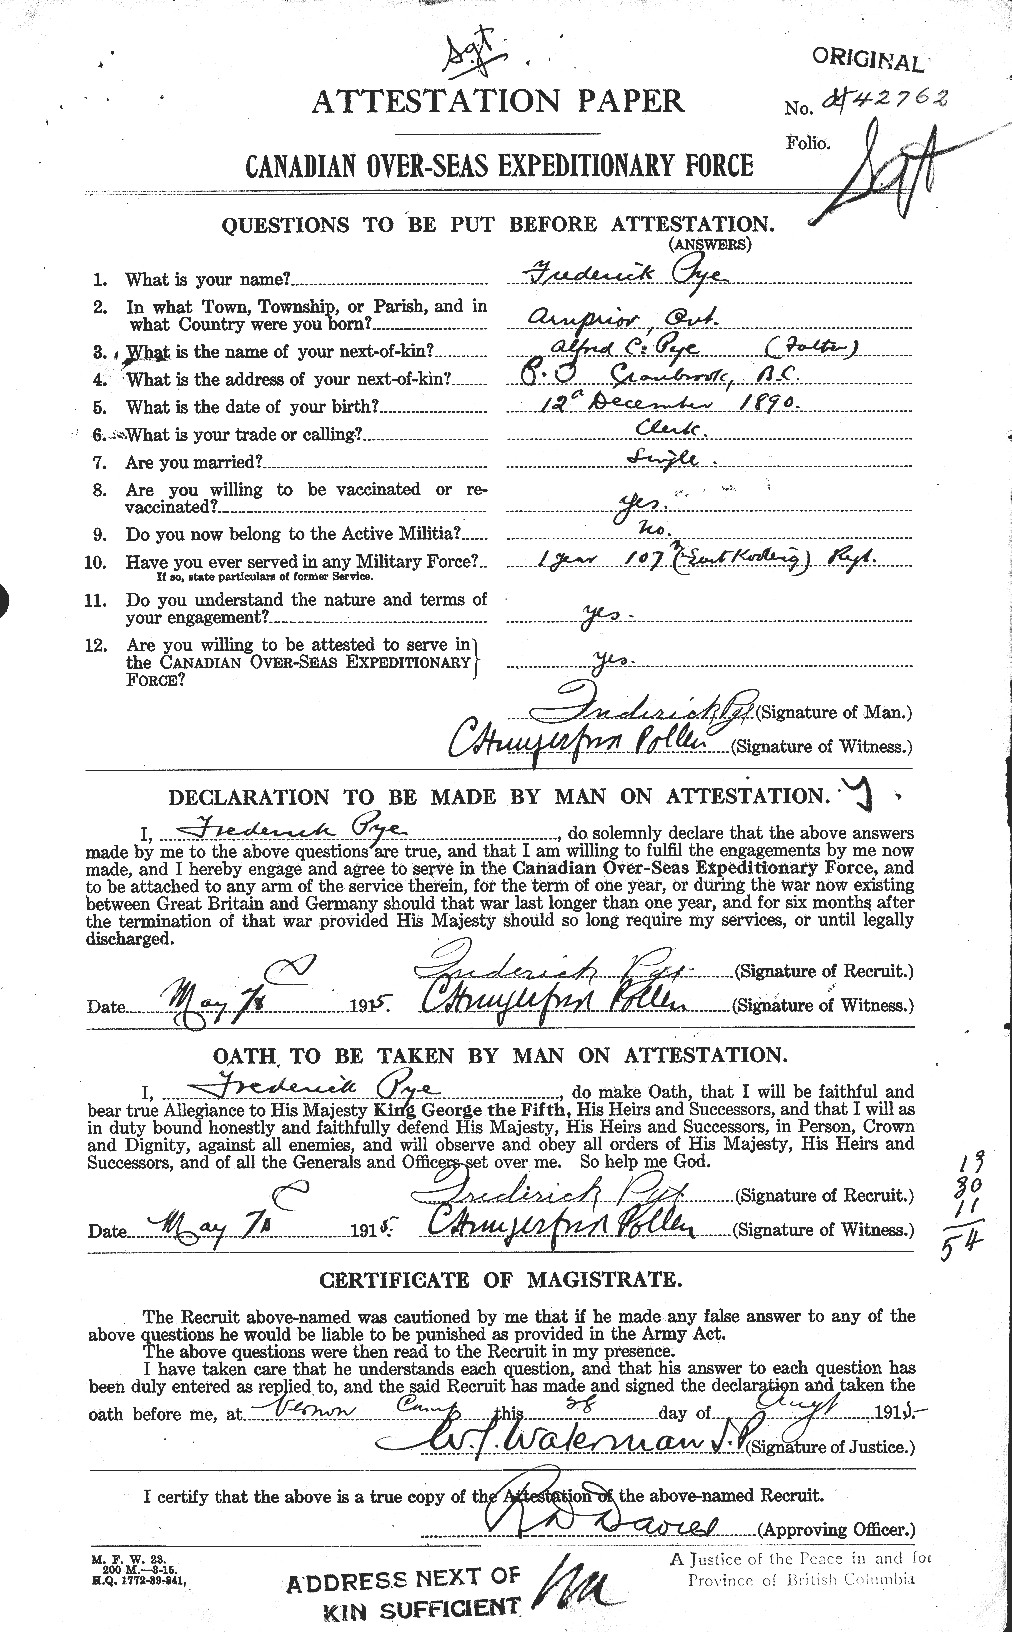 Personnel Records of the First World War - CEF 591843a